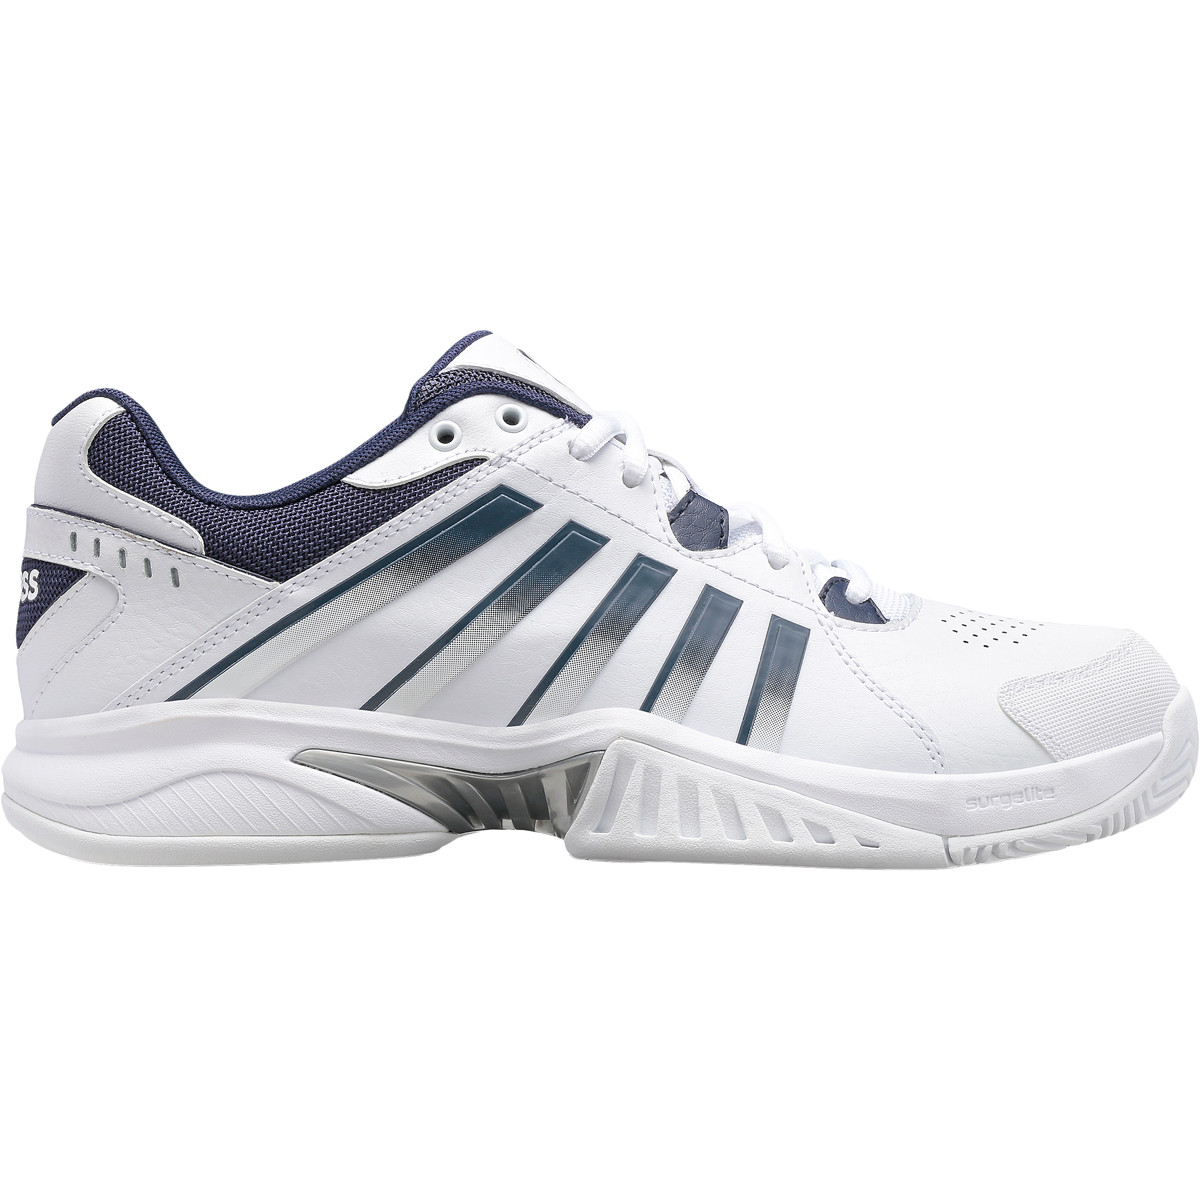 CHAUSSURES K-SWISS RECEIVER V TOUTES SURFACES